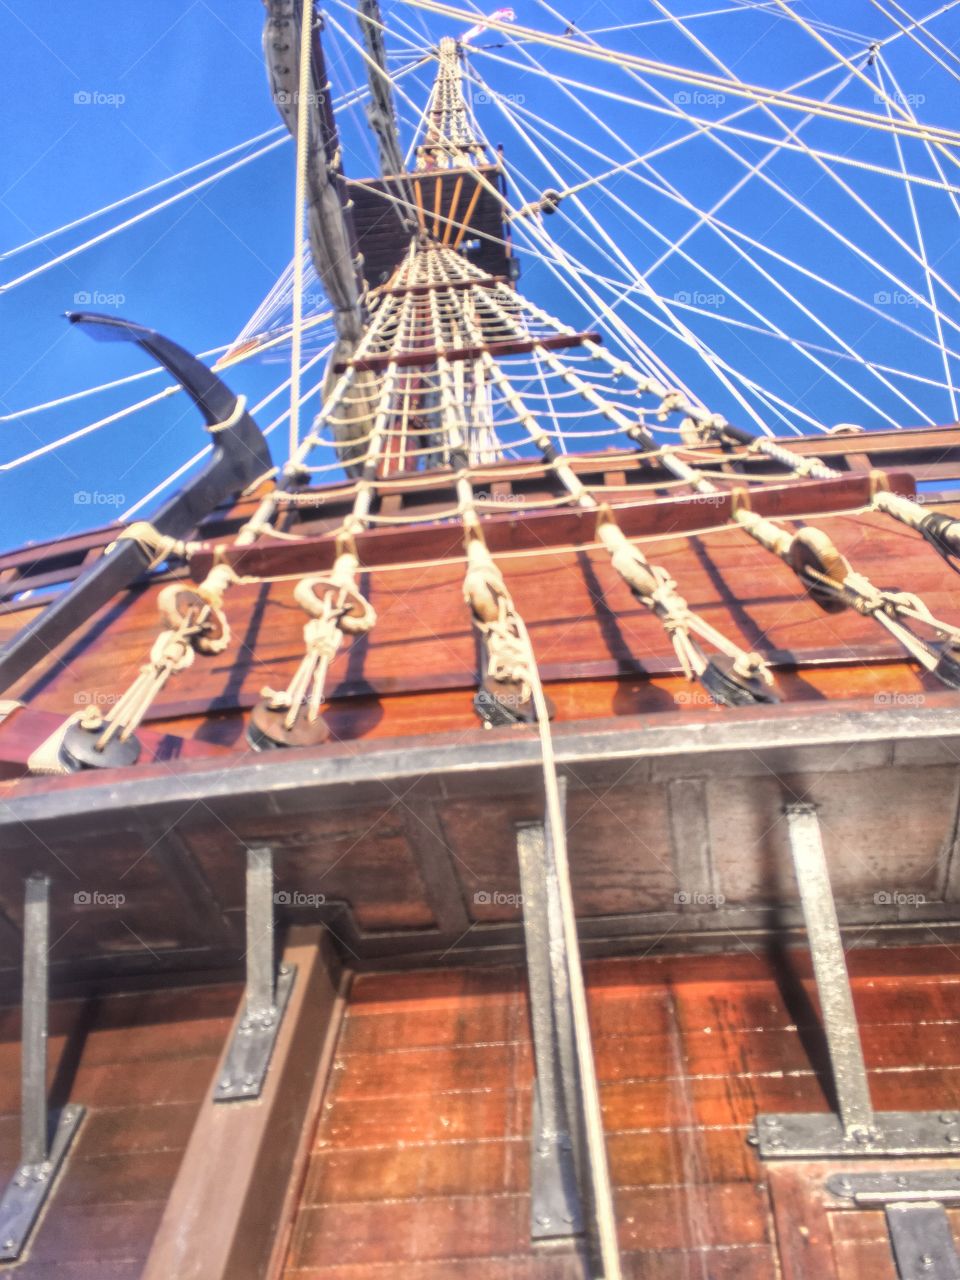 A pirates life . A rope ladder on an old ship 